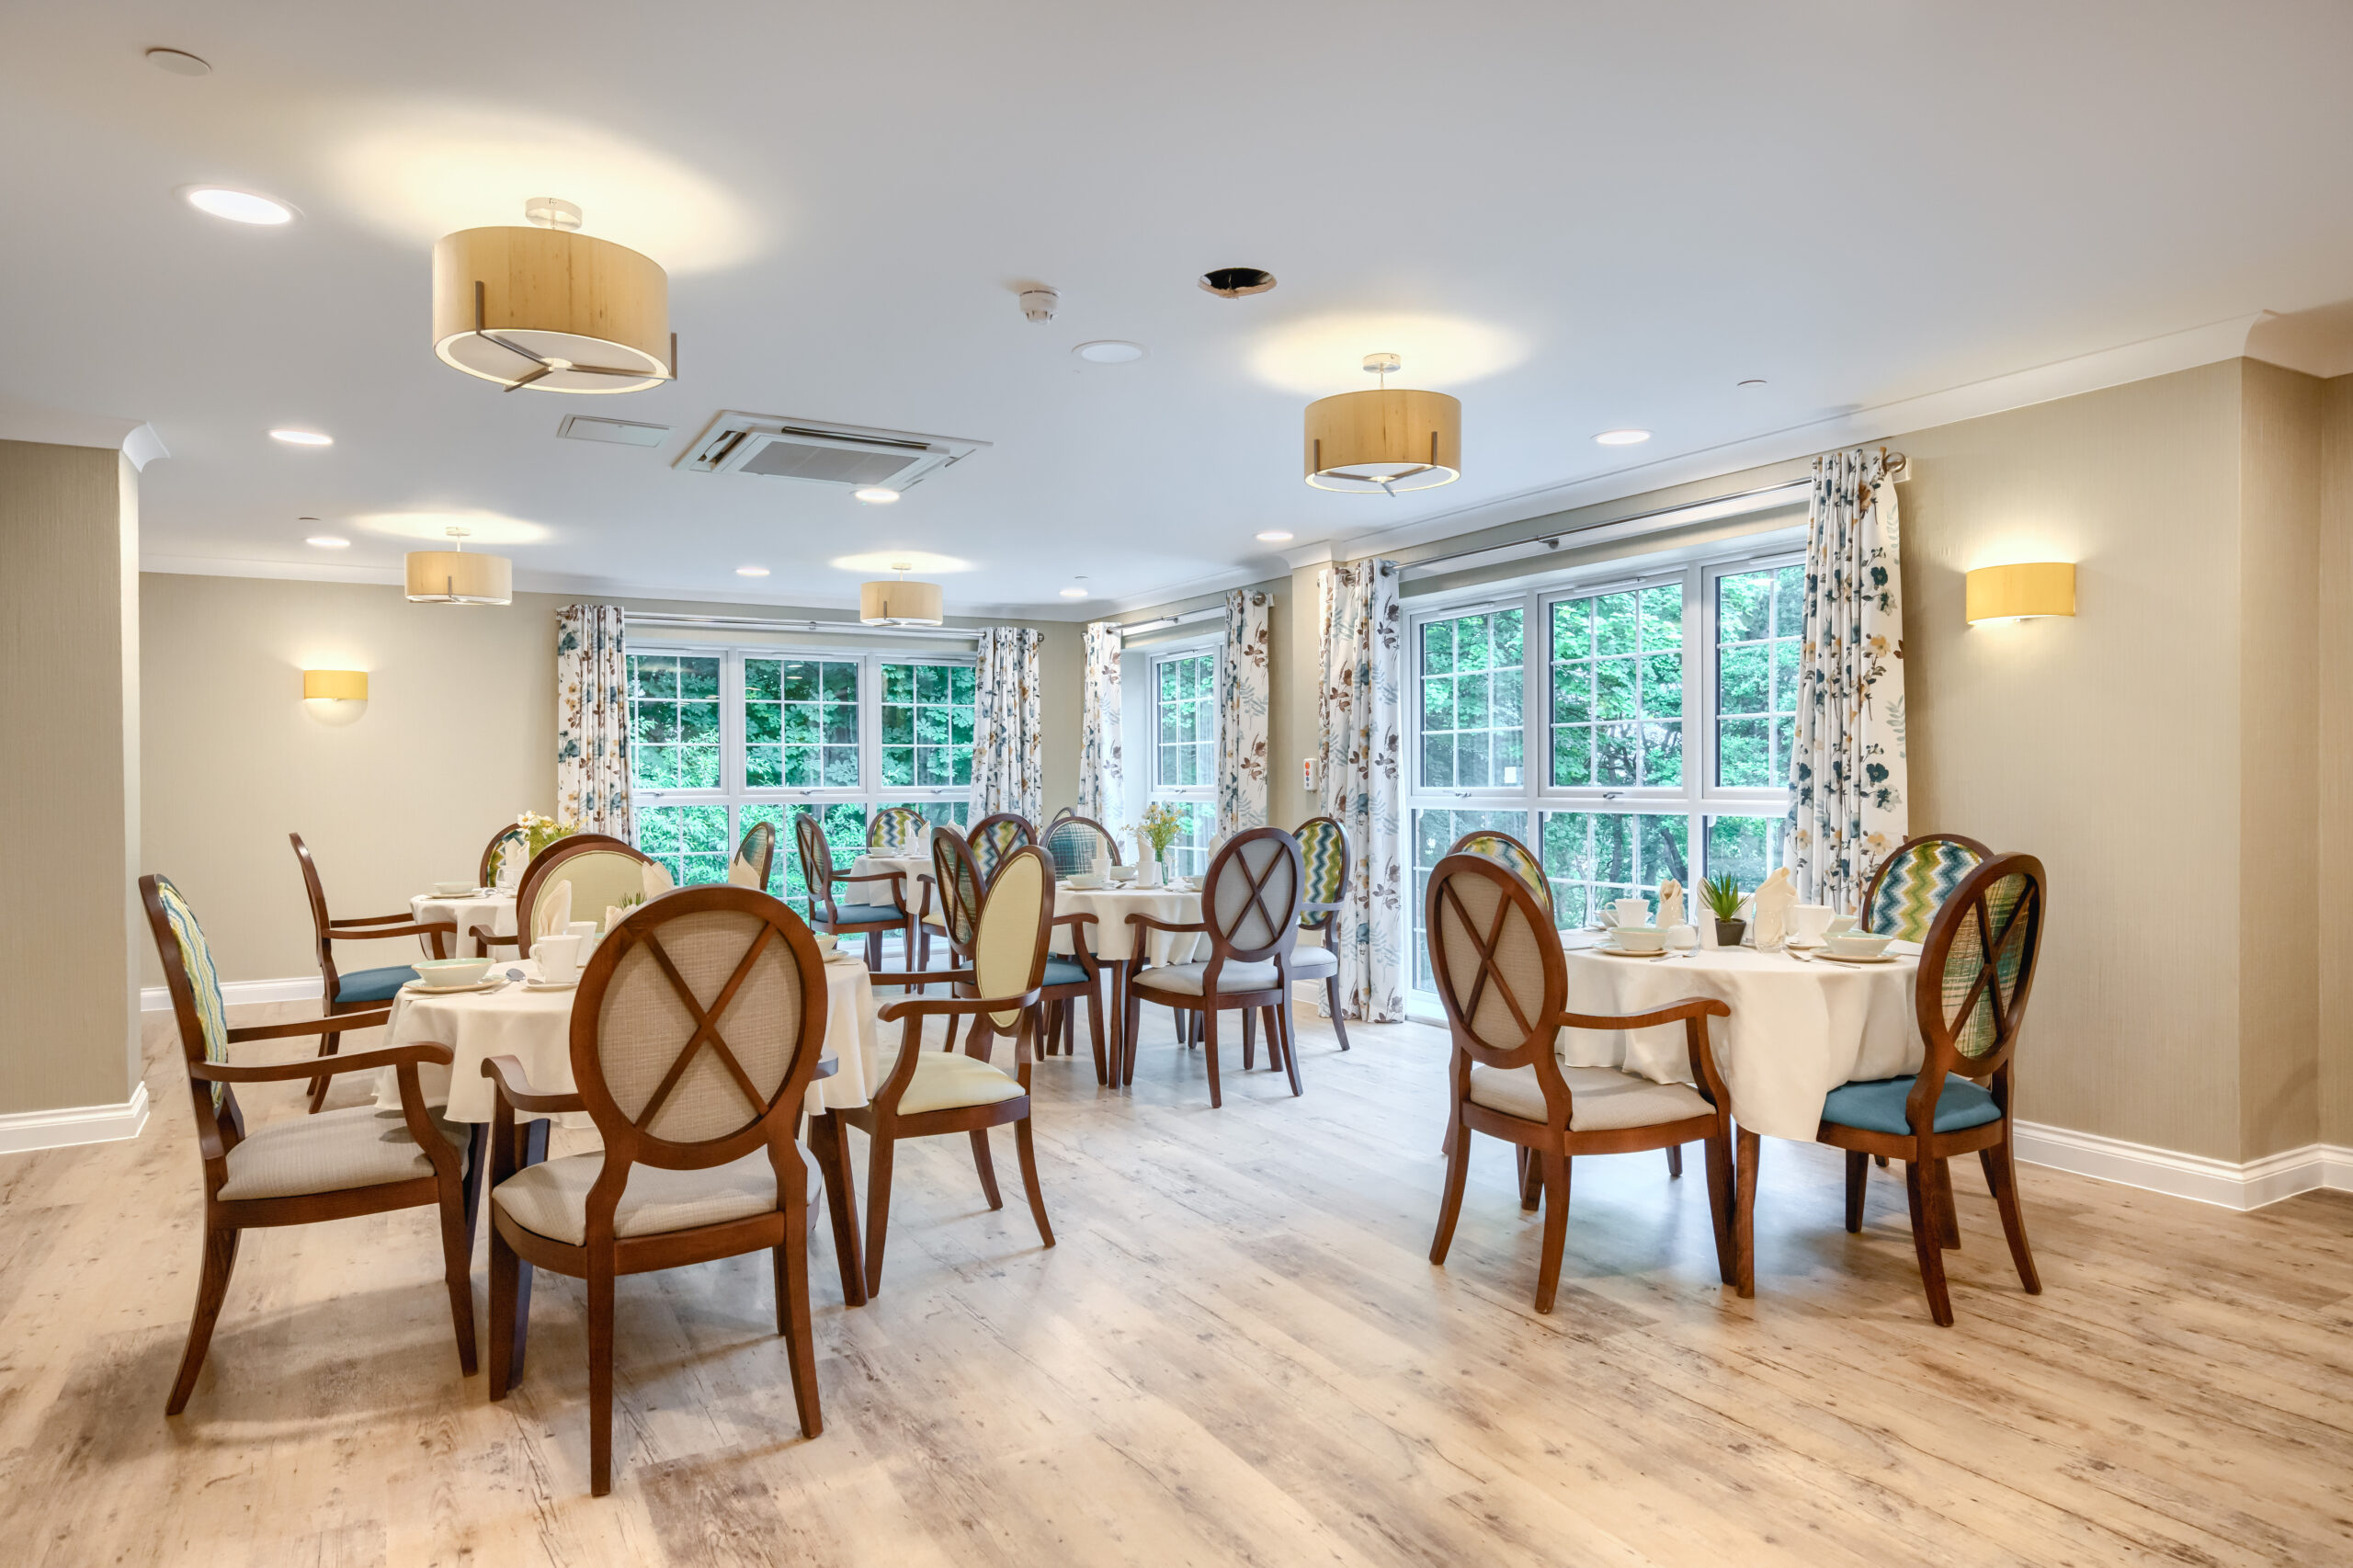 Dining room at Oakland Care Home in Swanley